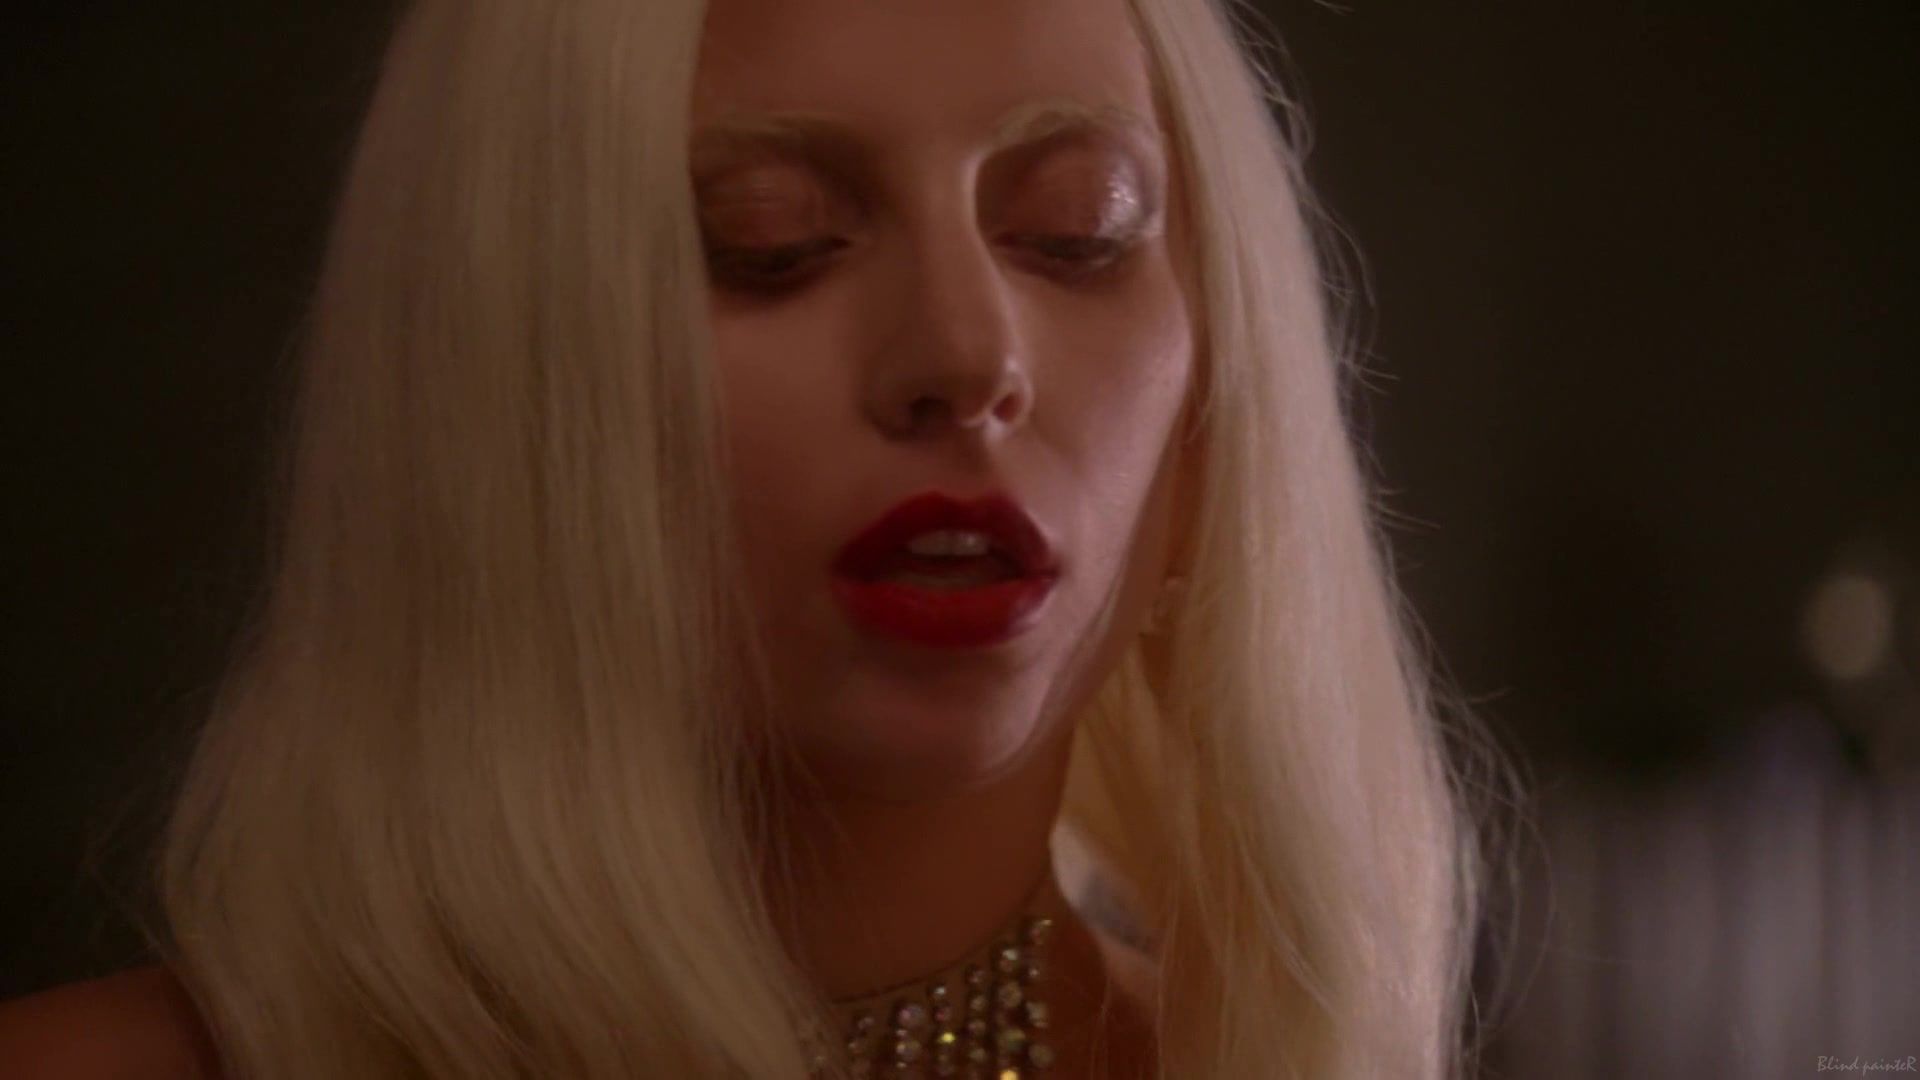 Candid Lady Gaga & Chasty Ballesteros nude - American Horror Story S05E01 (2015) College